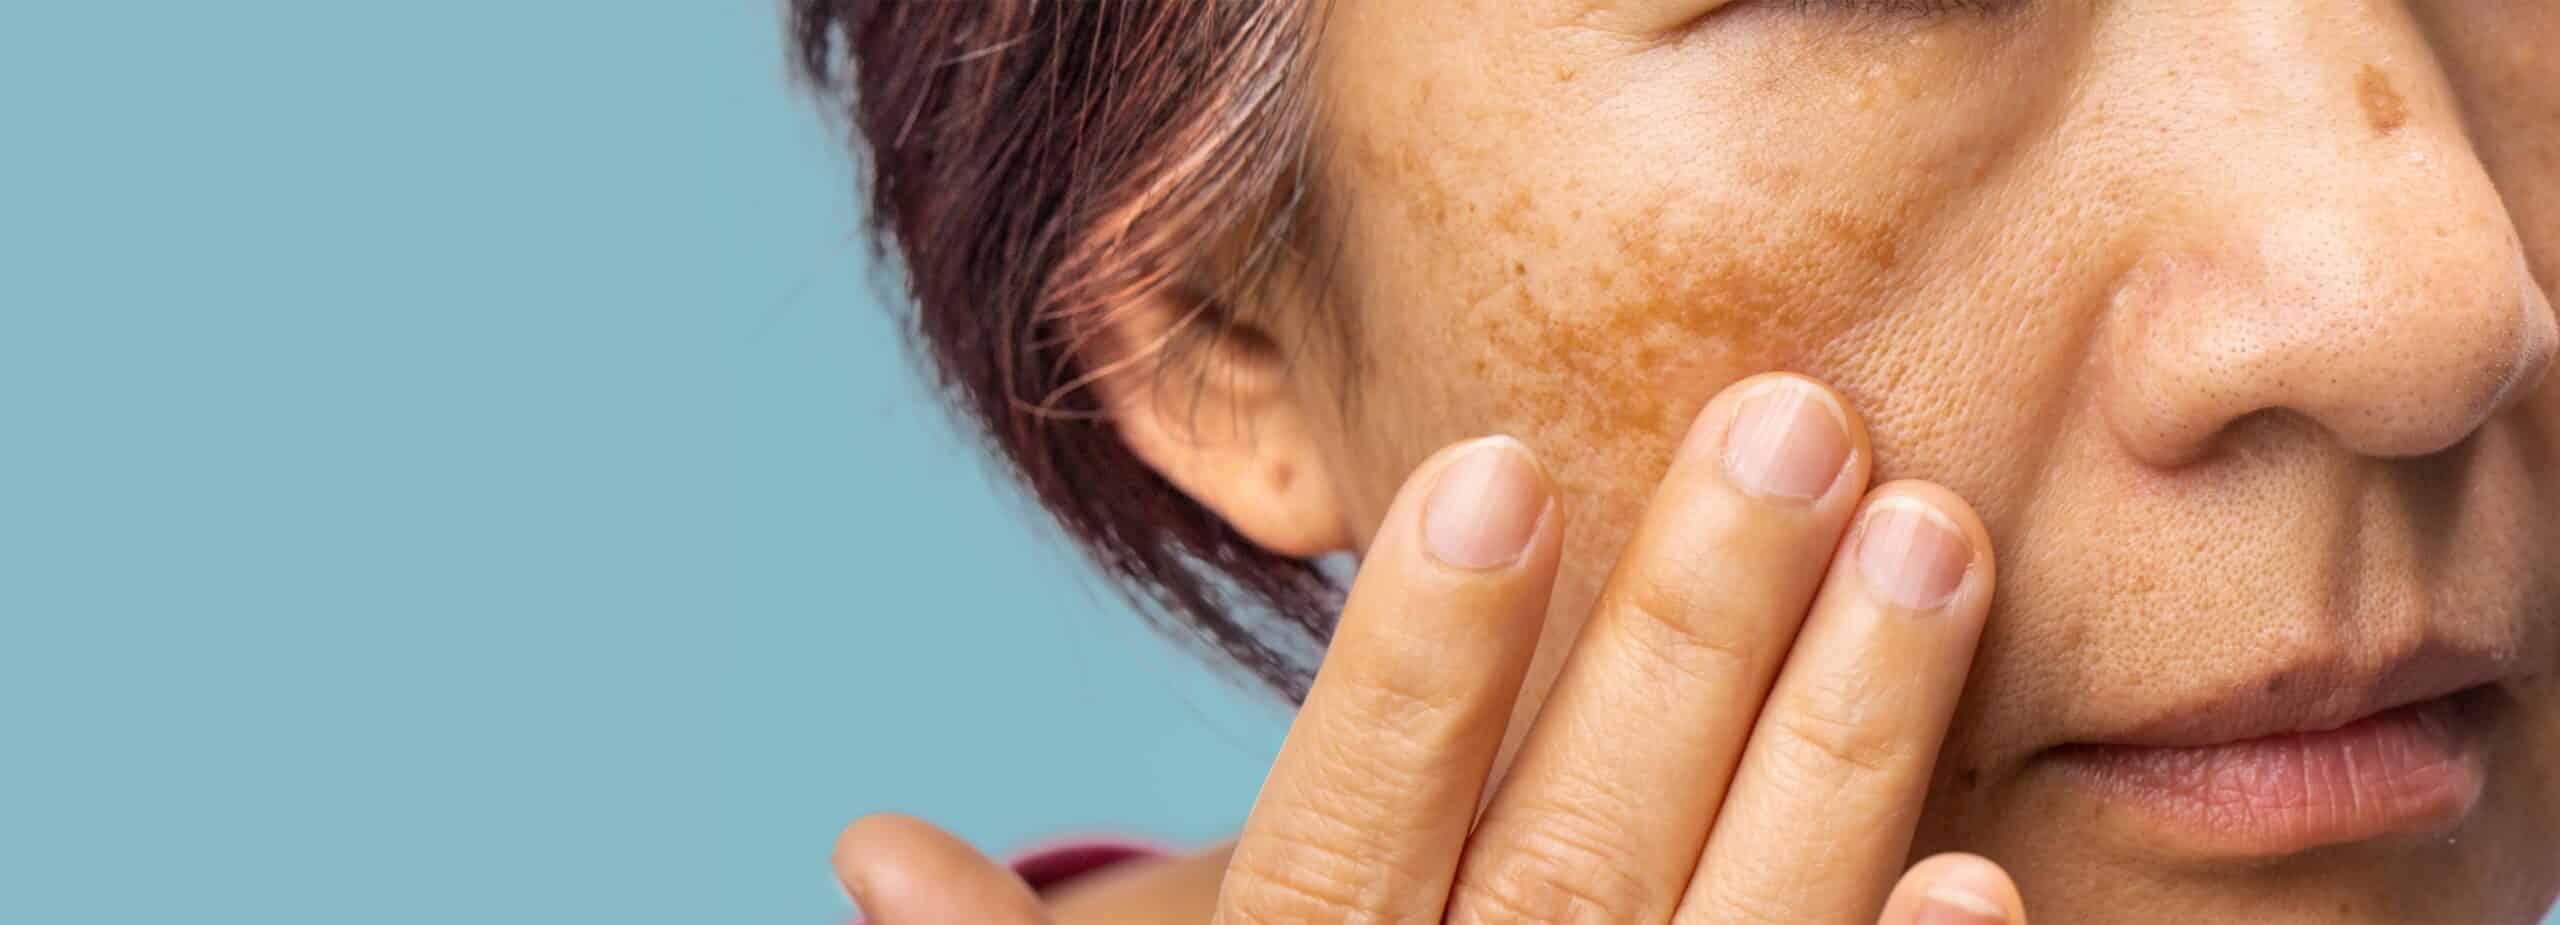 Factors that increase the risk of developing melasma